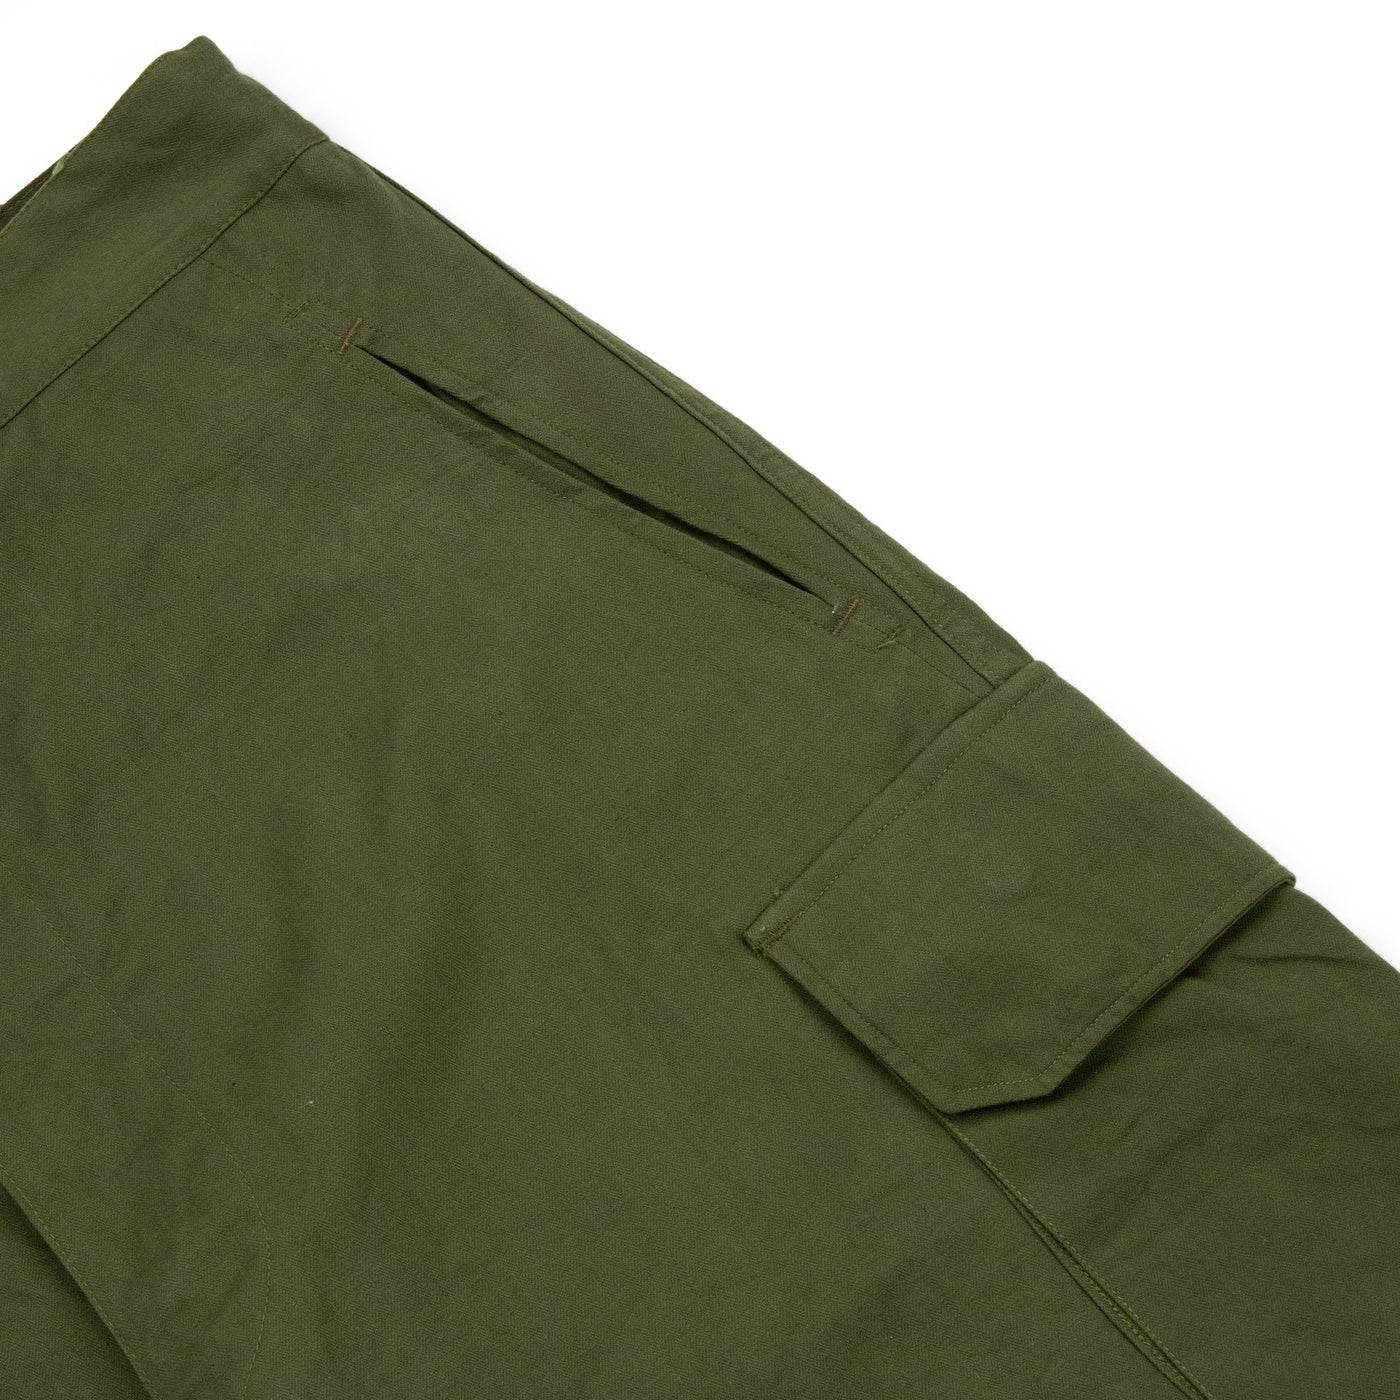 Vintage 1950s French Army M47 HBT Military Cargo Trousers - 36 Pocket